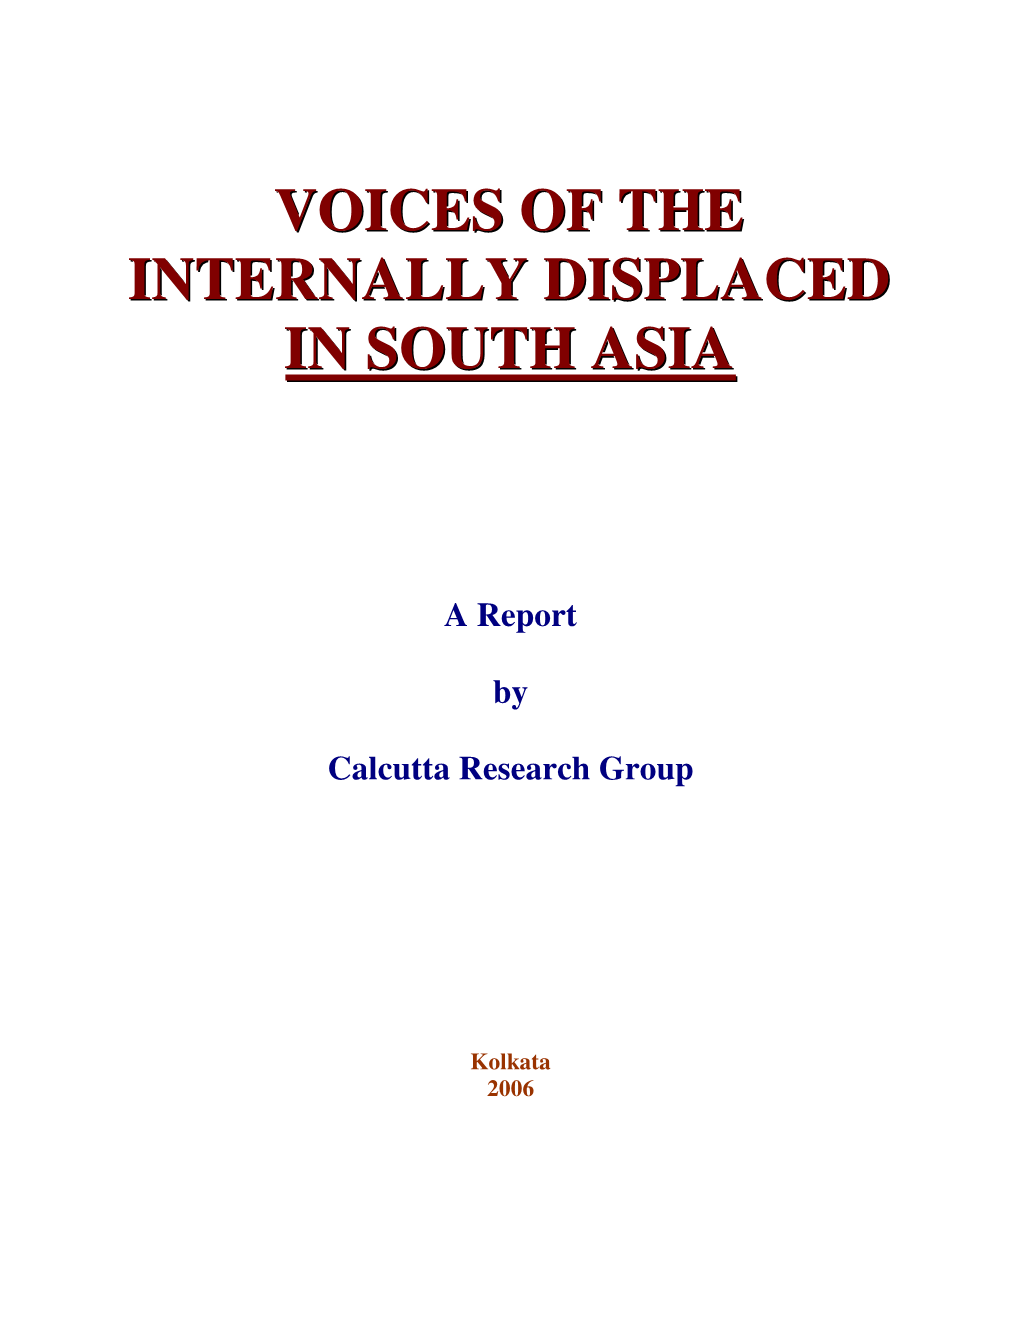 Voices of the Internally Displaced in South Asia, Report by Calcutta Research Group 2